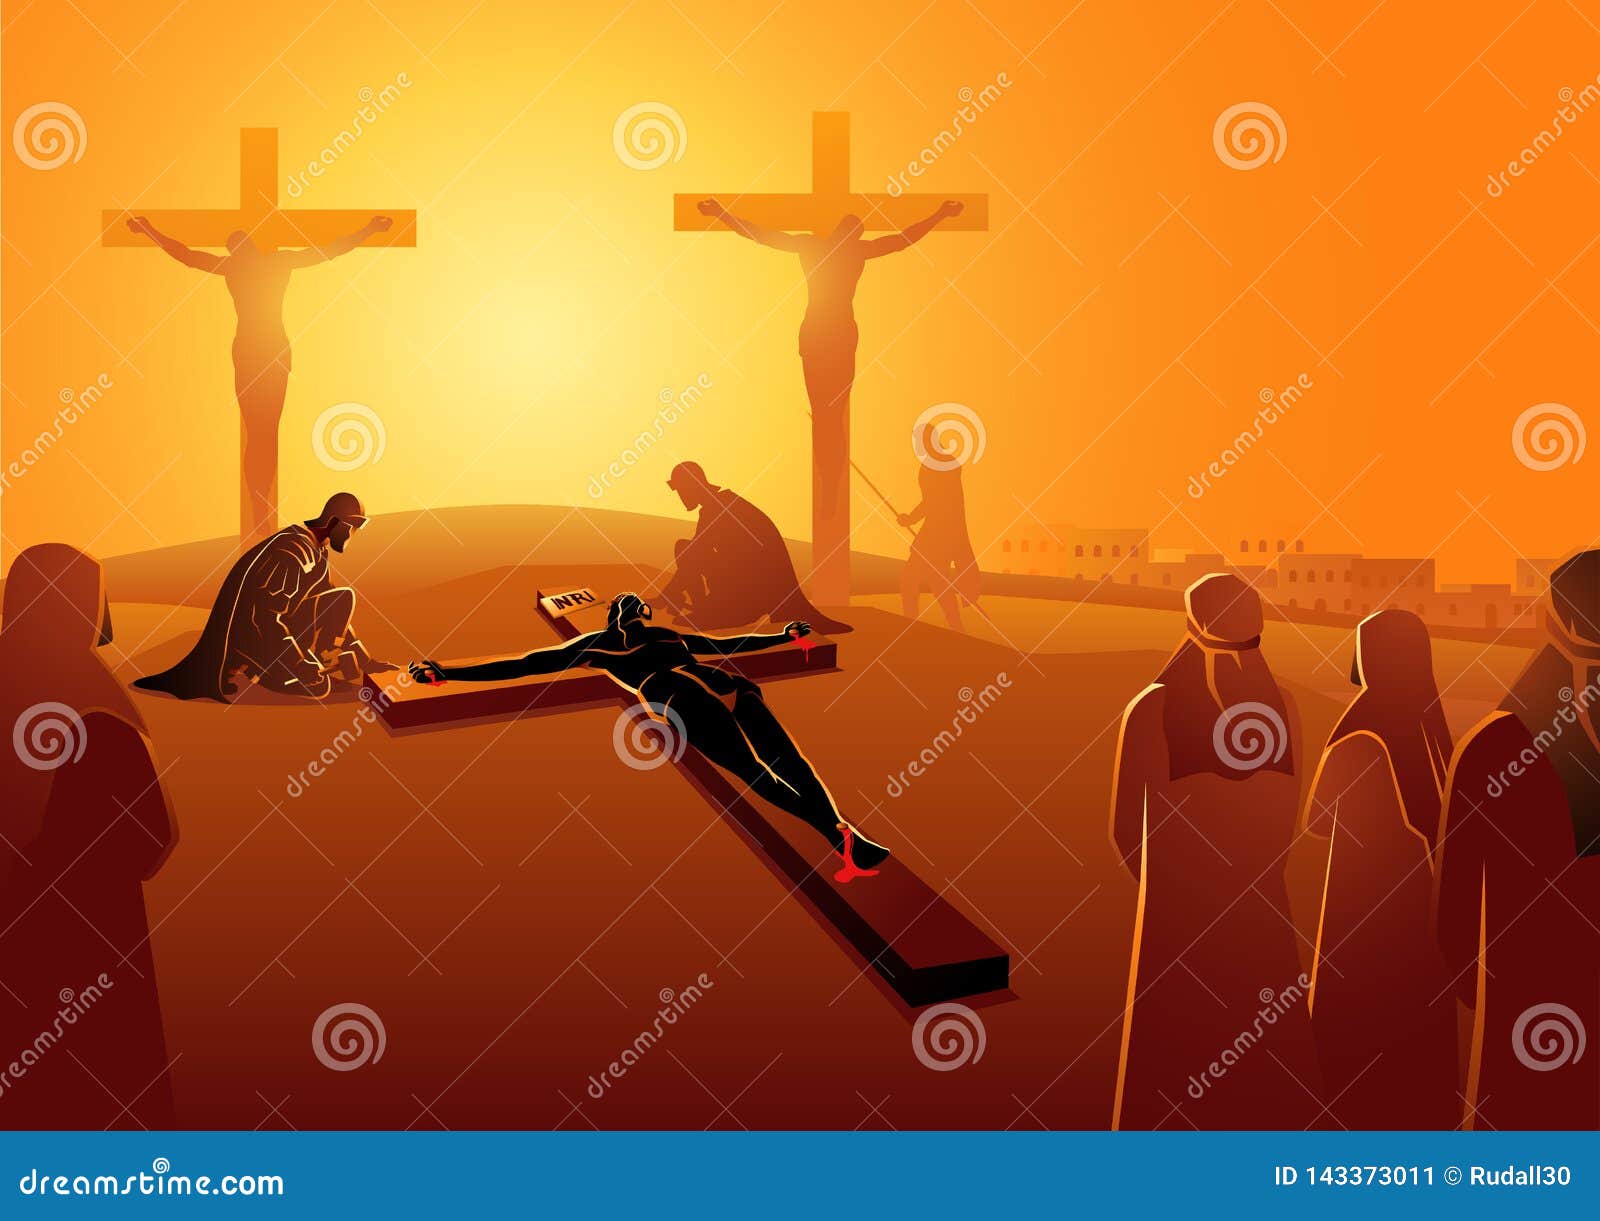 jesus is nailed to the cross